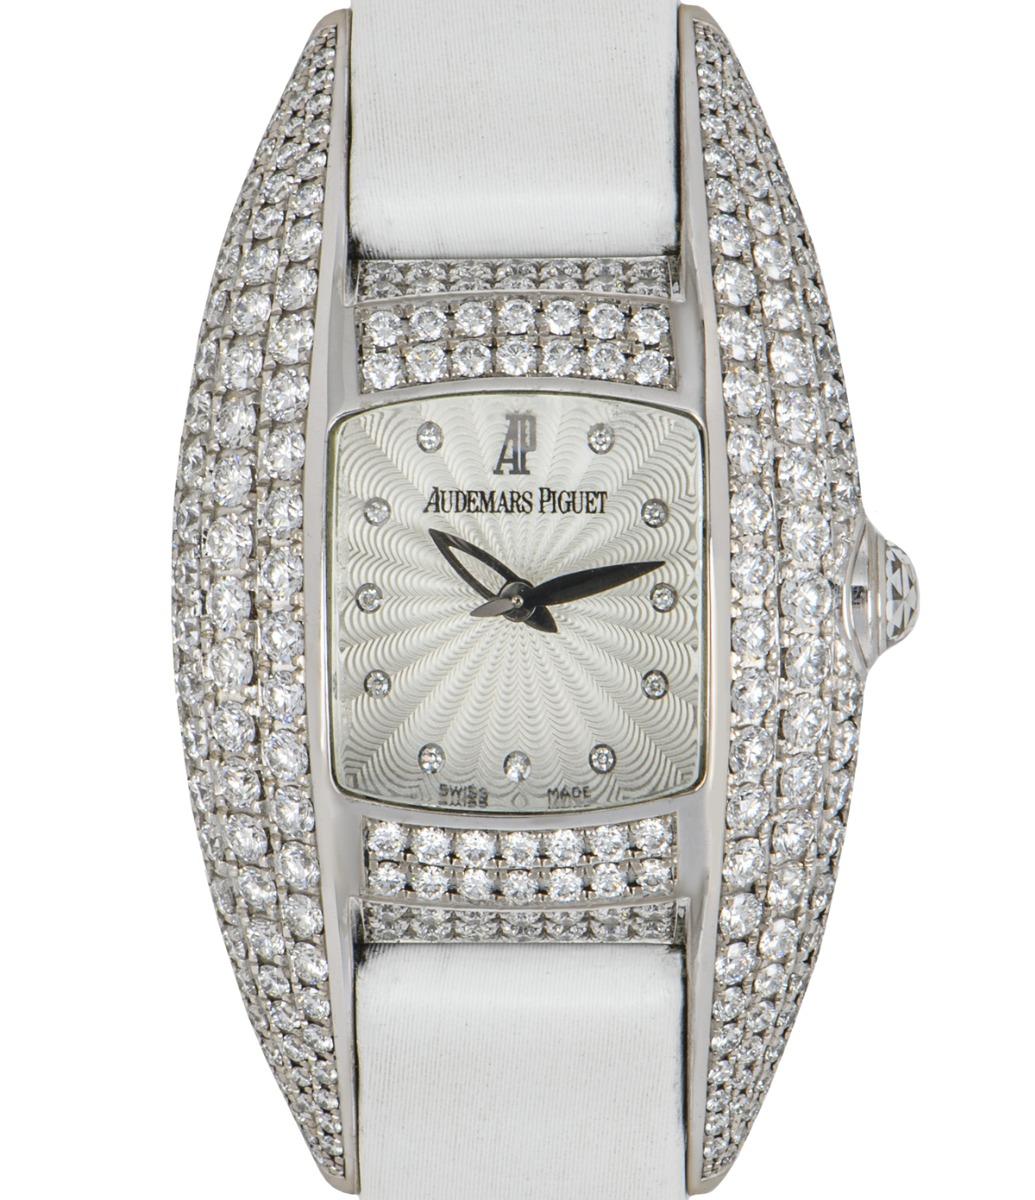 This Audemars Piguet Dream Women's Wristwatch really is a Dream!

Crafted from 18k white gold, it features a silver guilloche dial set with 11 diamond hour markers, a fixed bezel and case set with approximately 260 diamonds. Set to the side of the